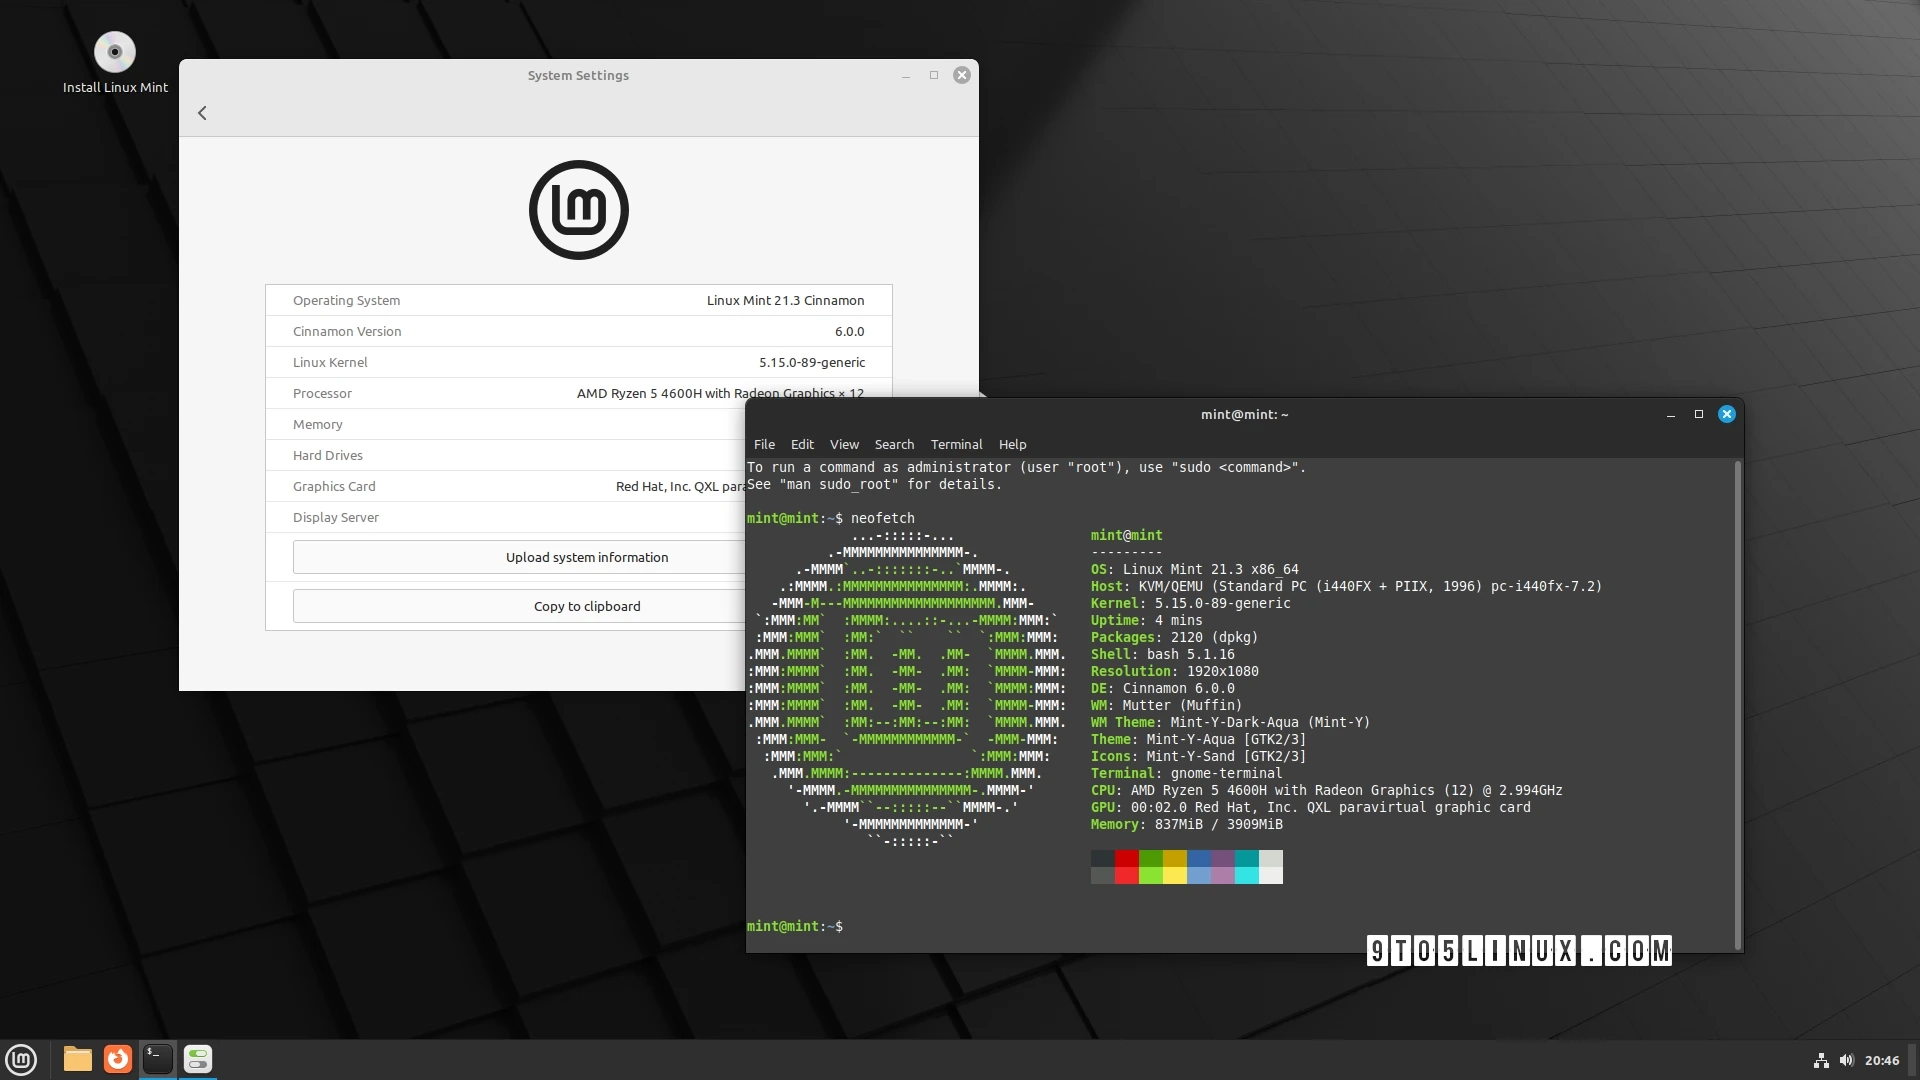 Now Available: Download the Latest Linux Mint 21.3 Beta with Cinnamon 6.0